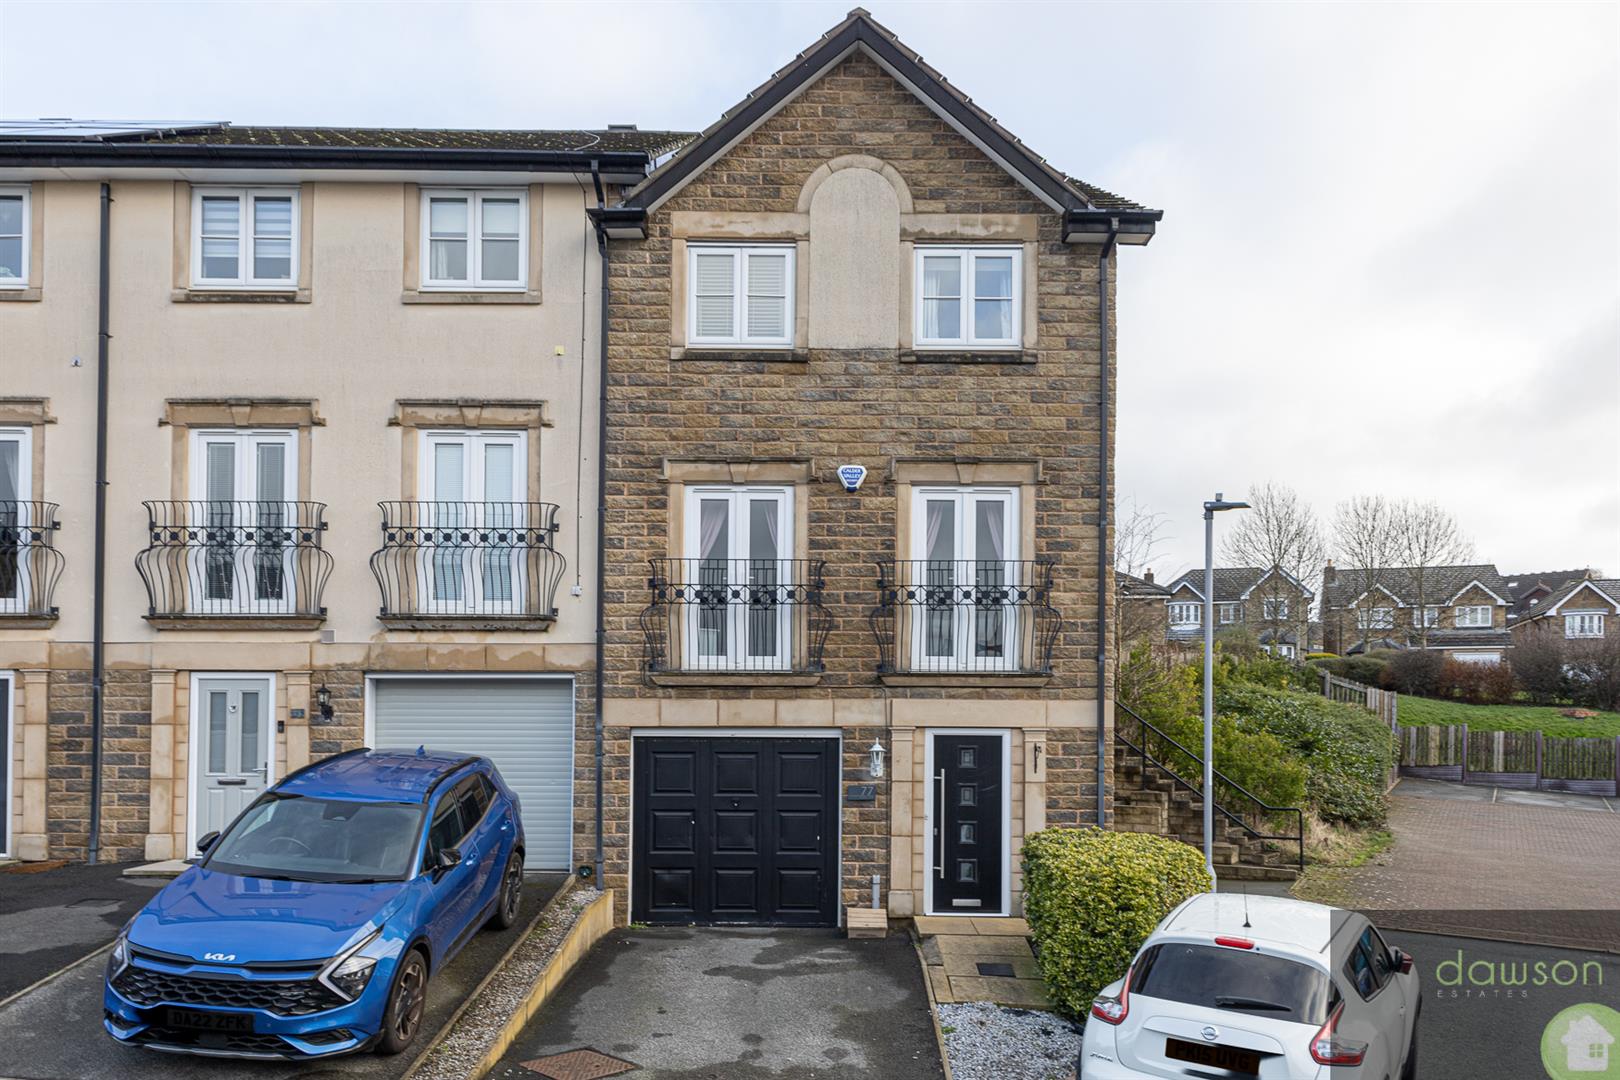 4 bed town house for sale in Hudson View, Bradford - Property Image 1